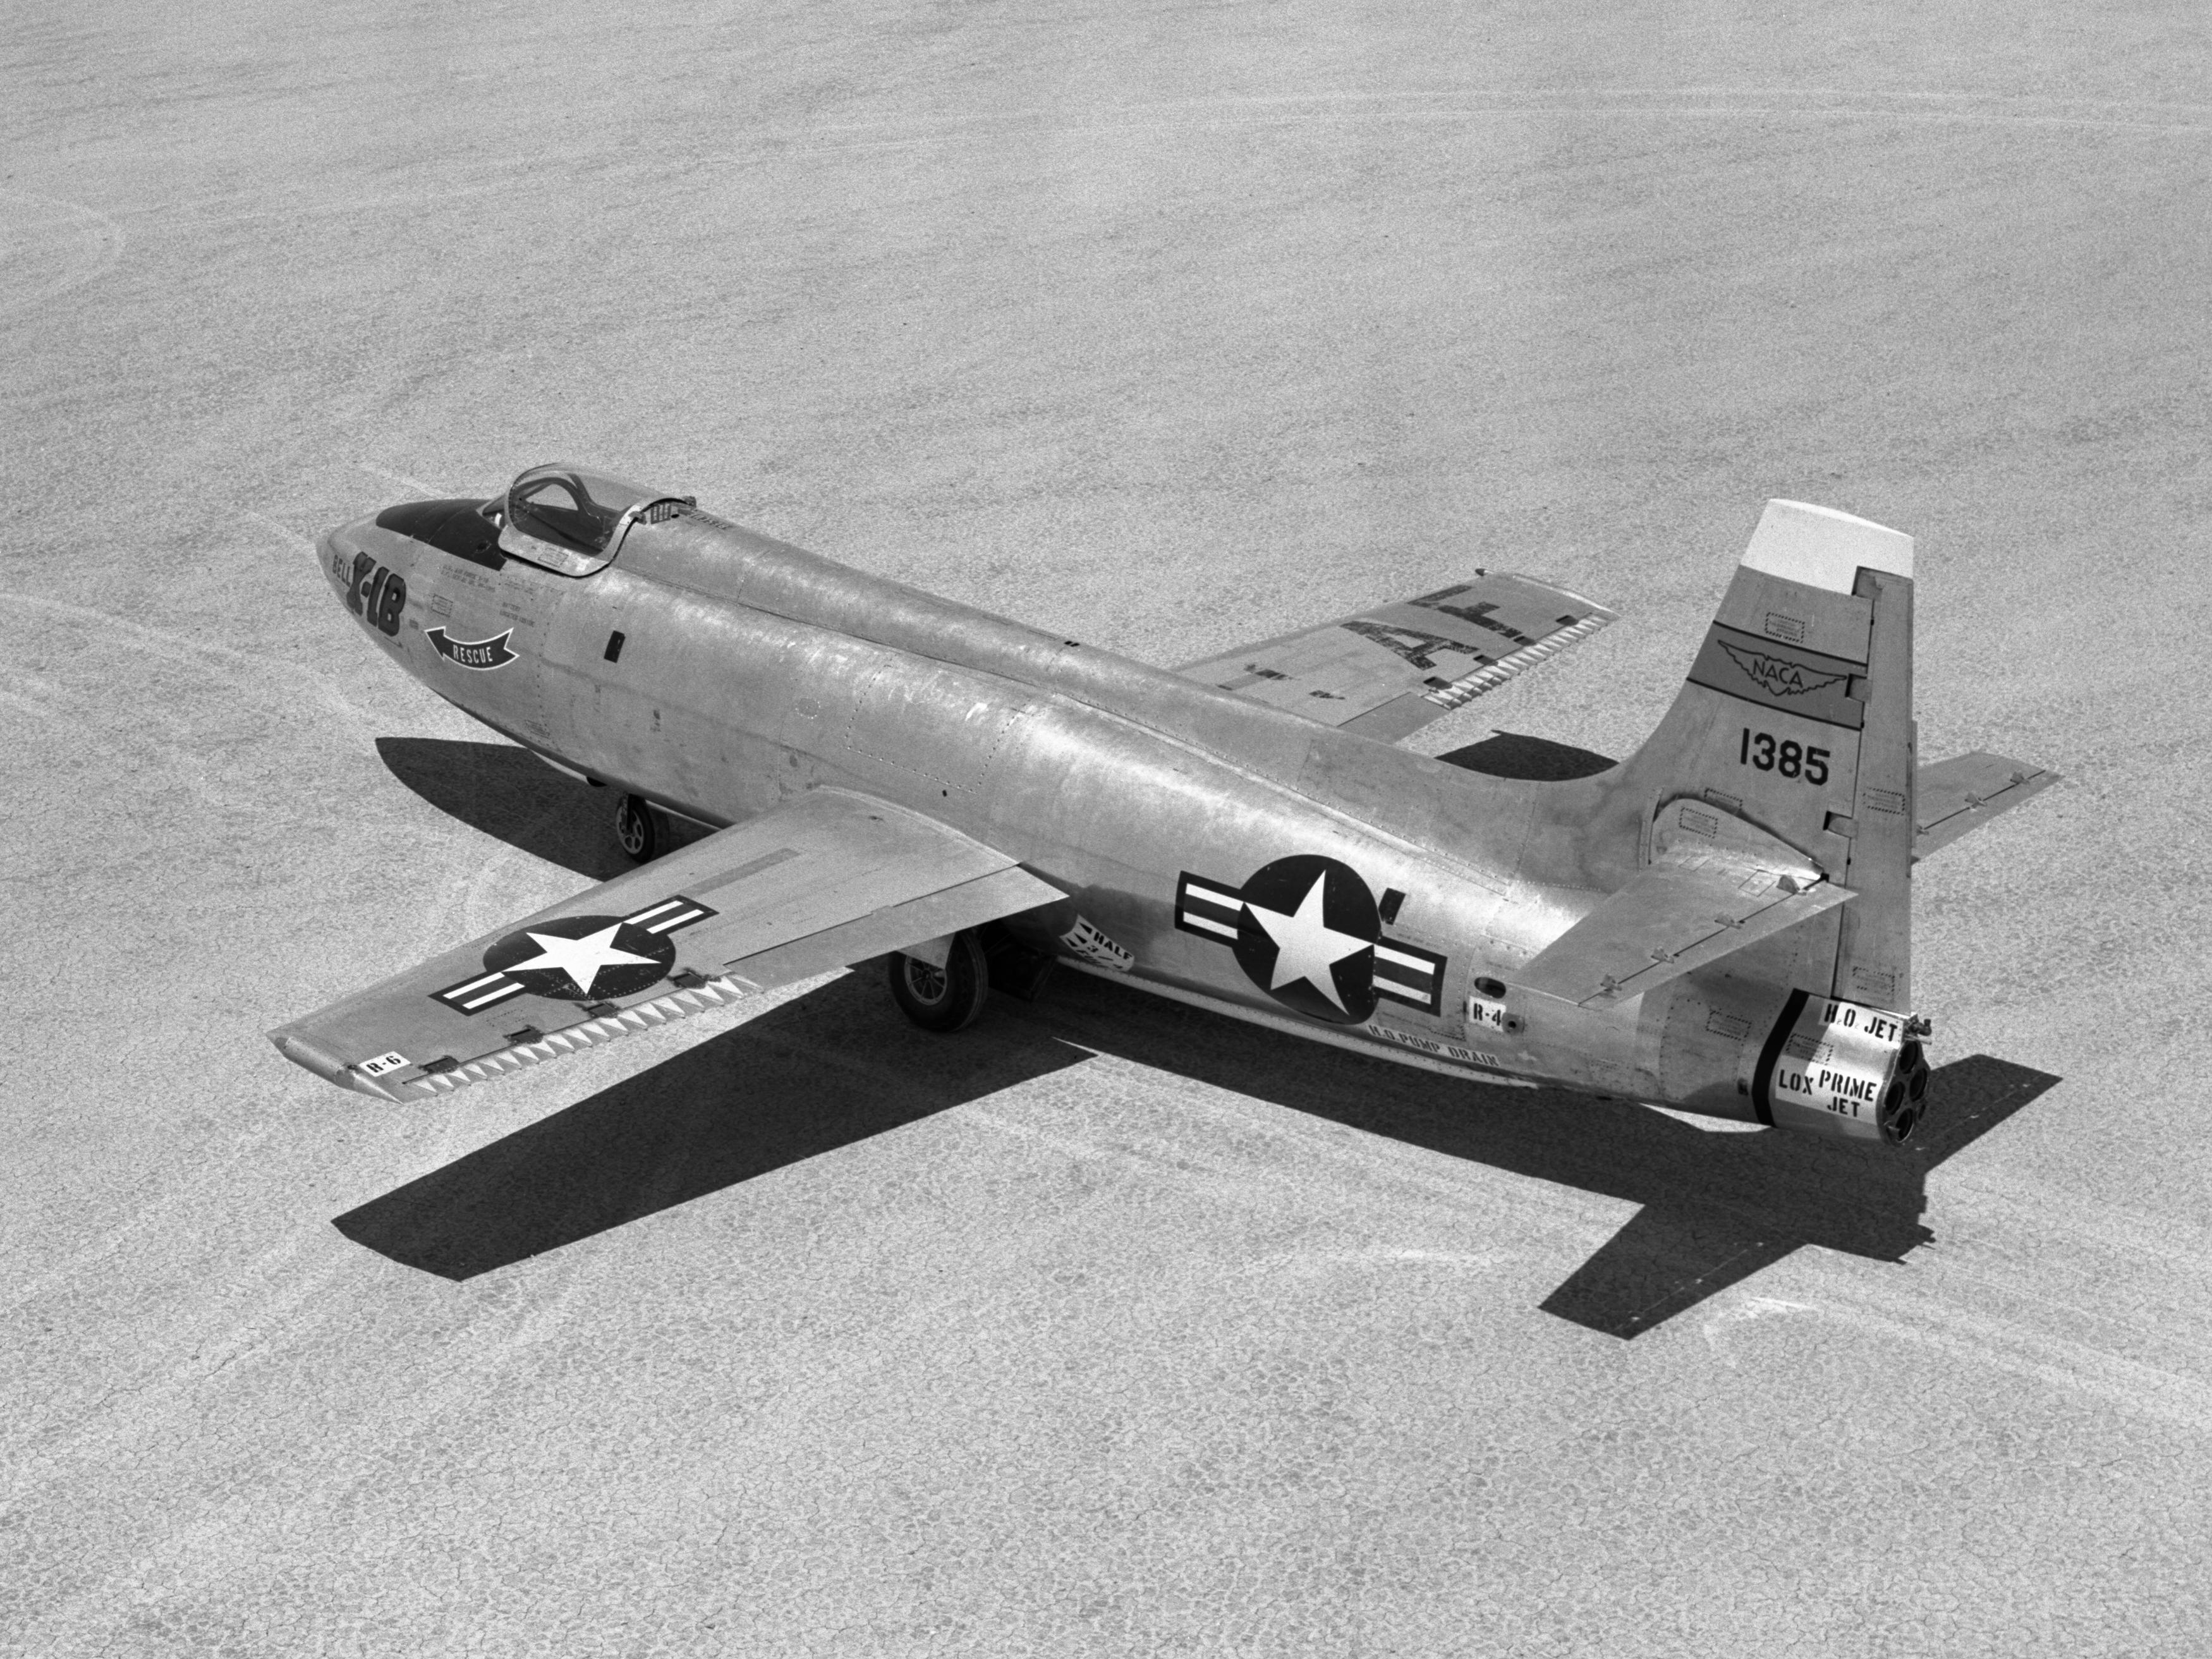 Military Bell X-1 HD Wallpaper | Background Image